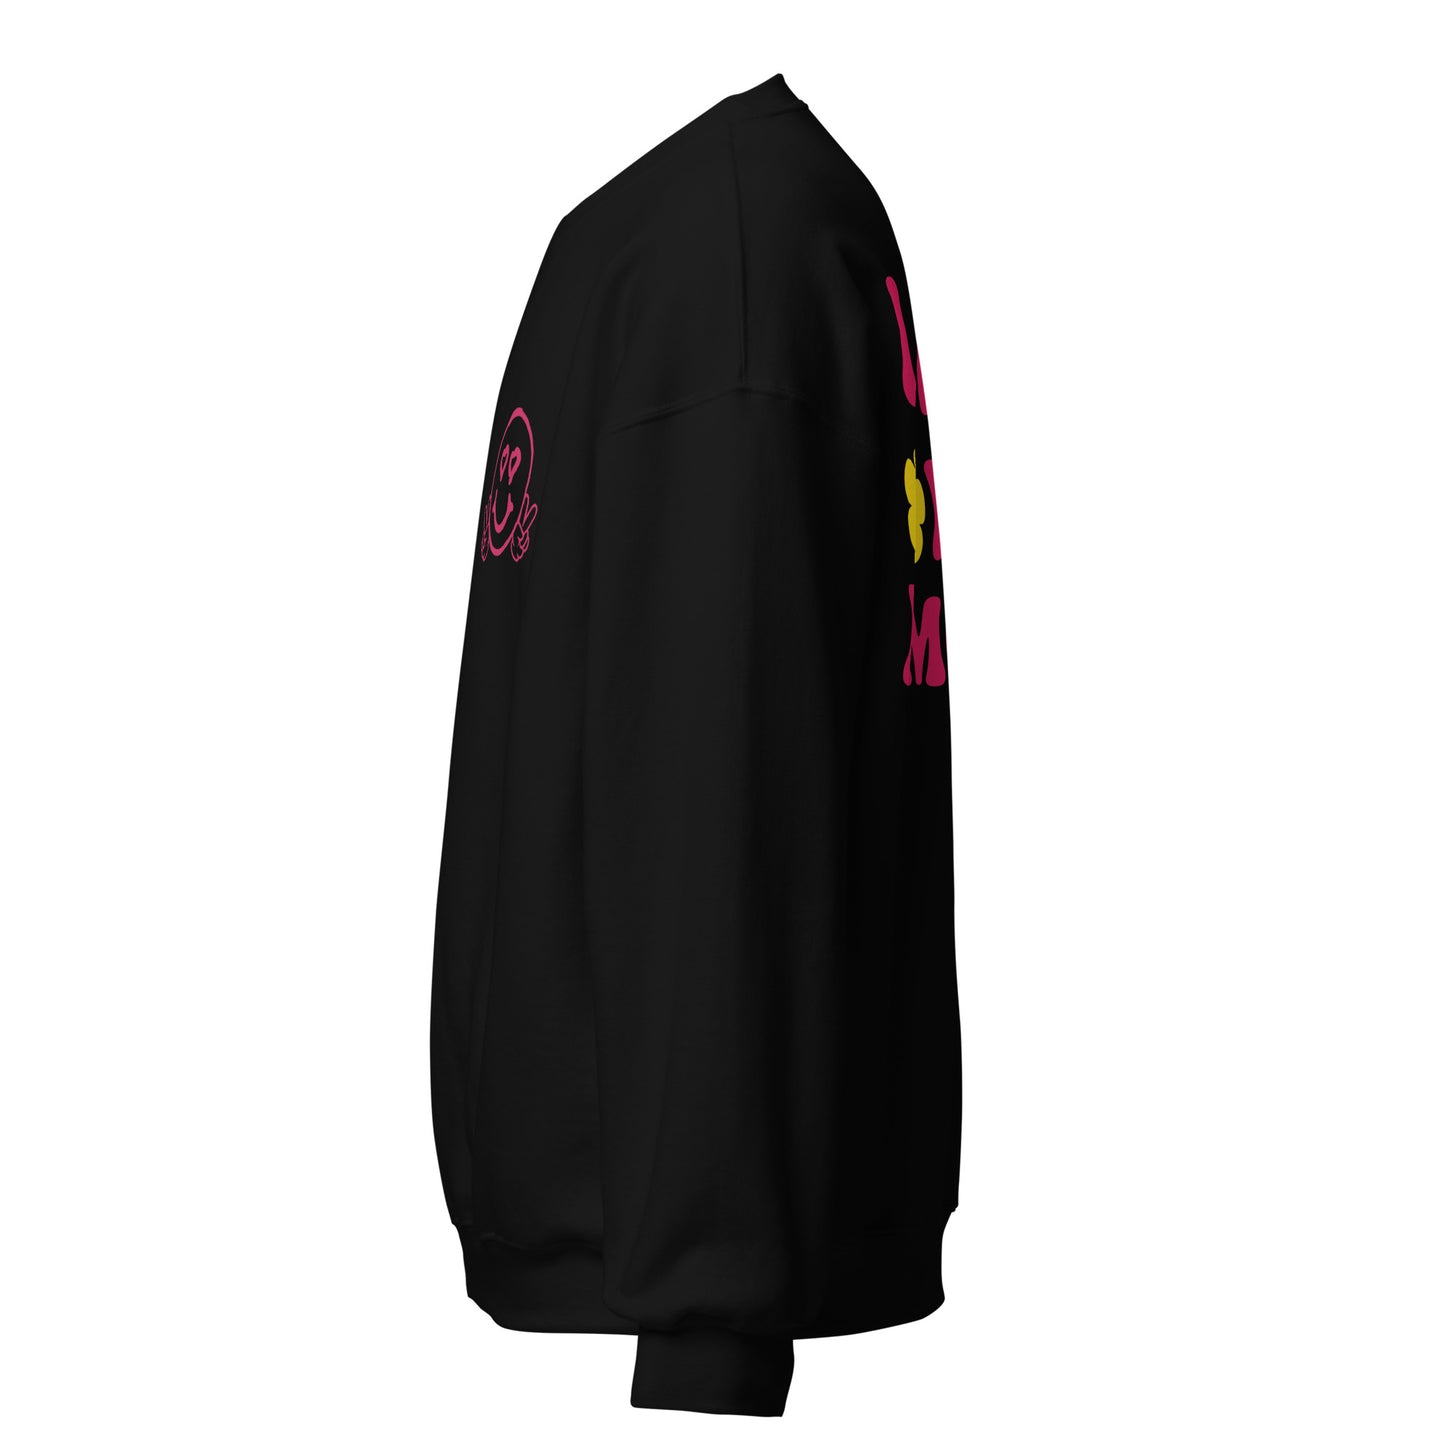 Smiley Face Black Sweatshirt, "I Love You More" on Back (Hot Pink Text, Yellow Flower)